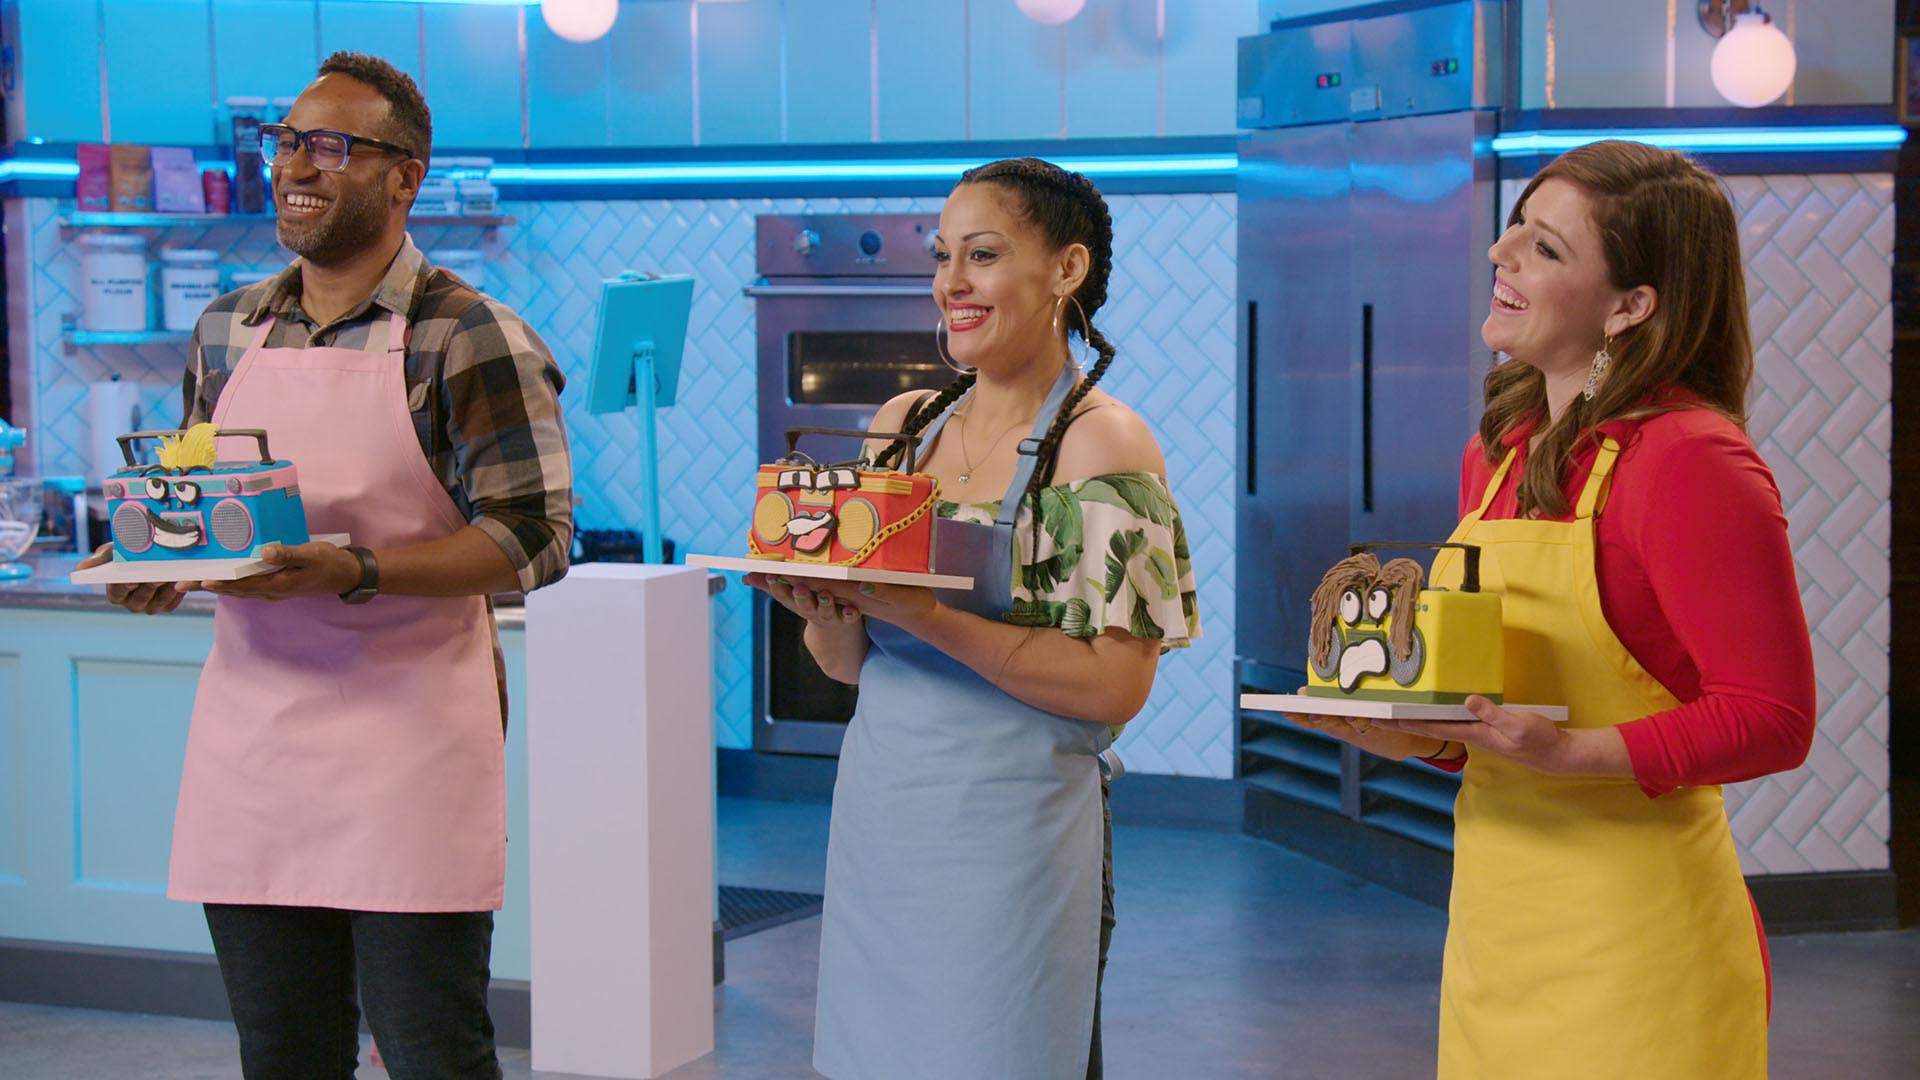 Ten Food and Cooking Shows You Can Stream Right Now to Help Up Your Quarantine Kitchen Game